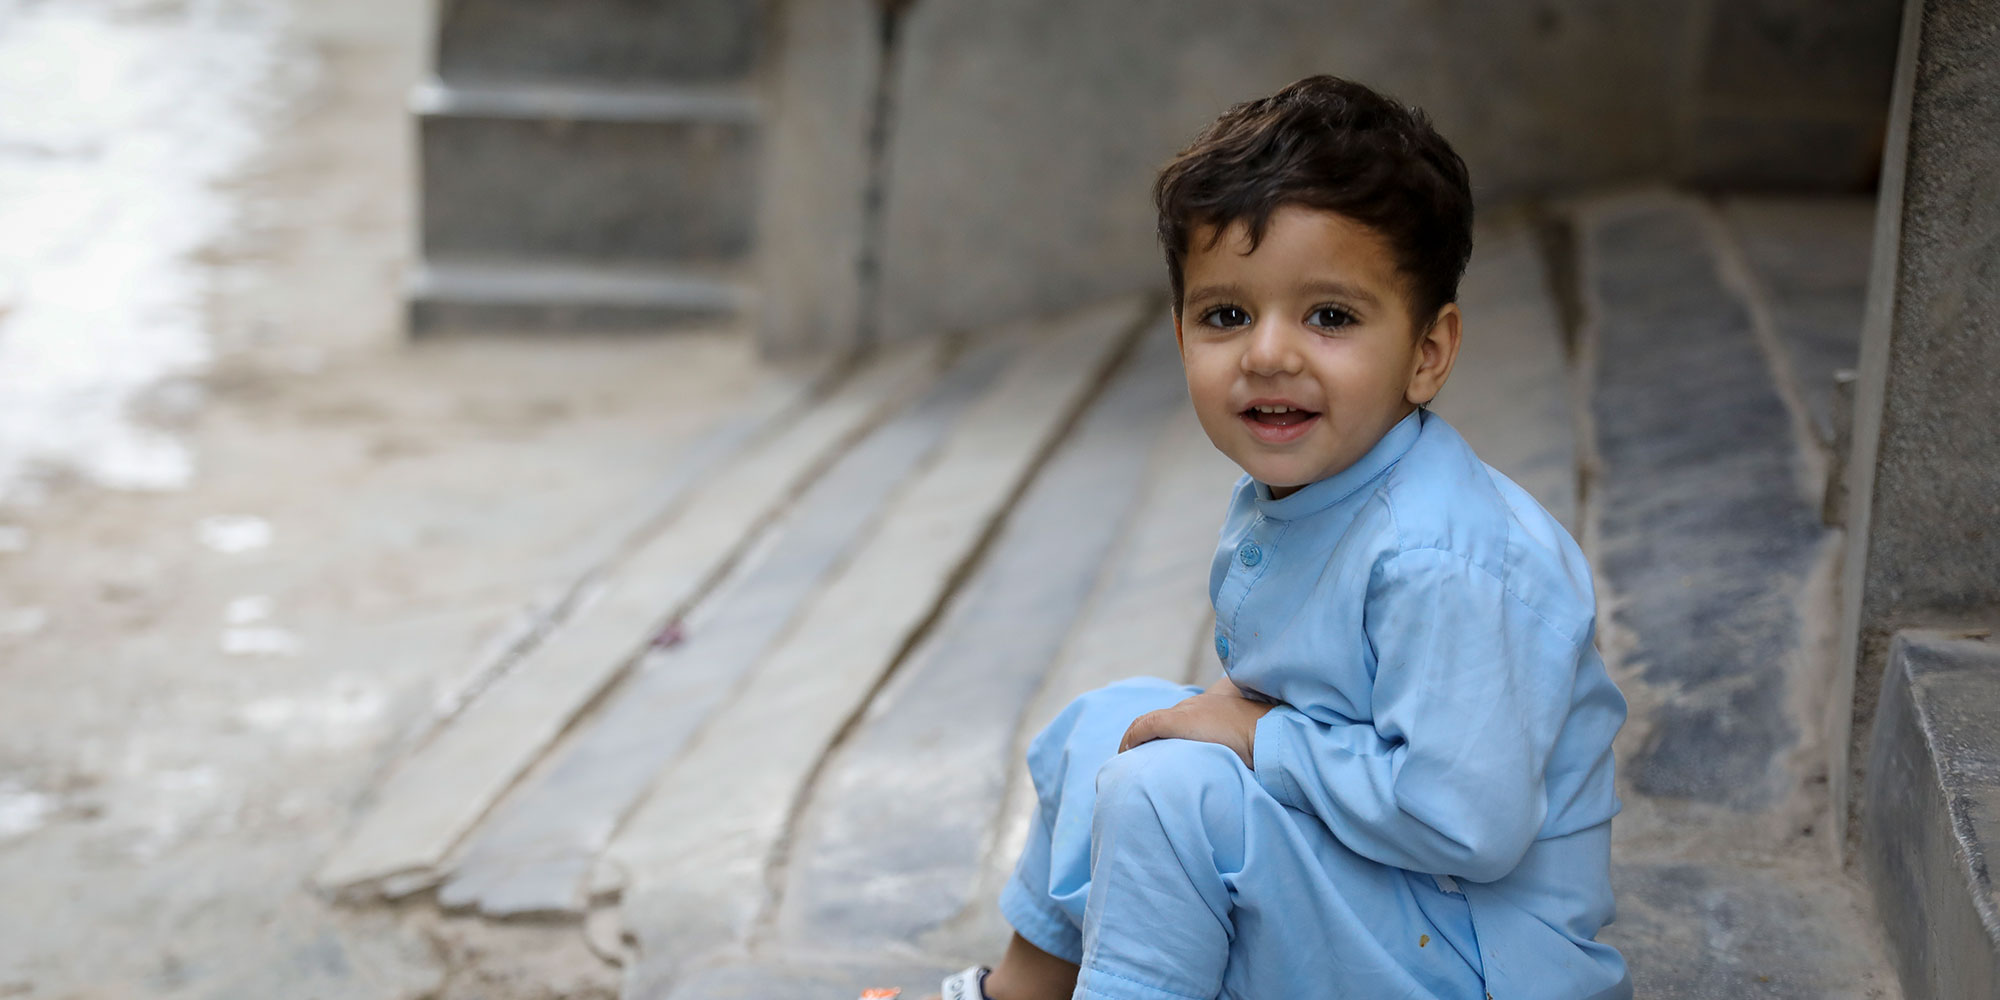 "My son recently got vaccinated against measles and polio. I am happy that he is safe now.” Alamgir, father to two-year-old Fazain. Credit: Gavi/2023/Asad Zaidi